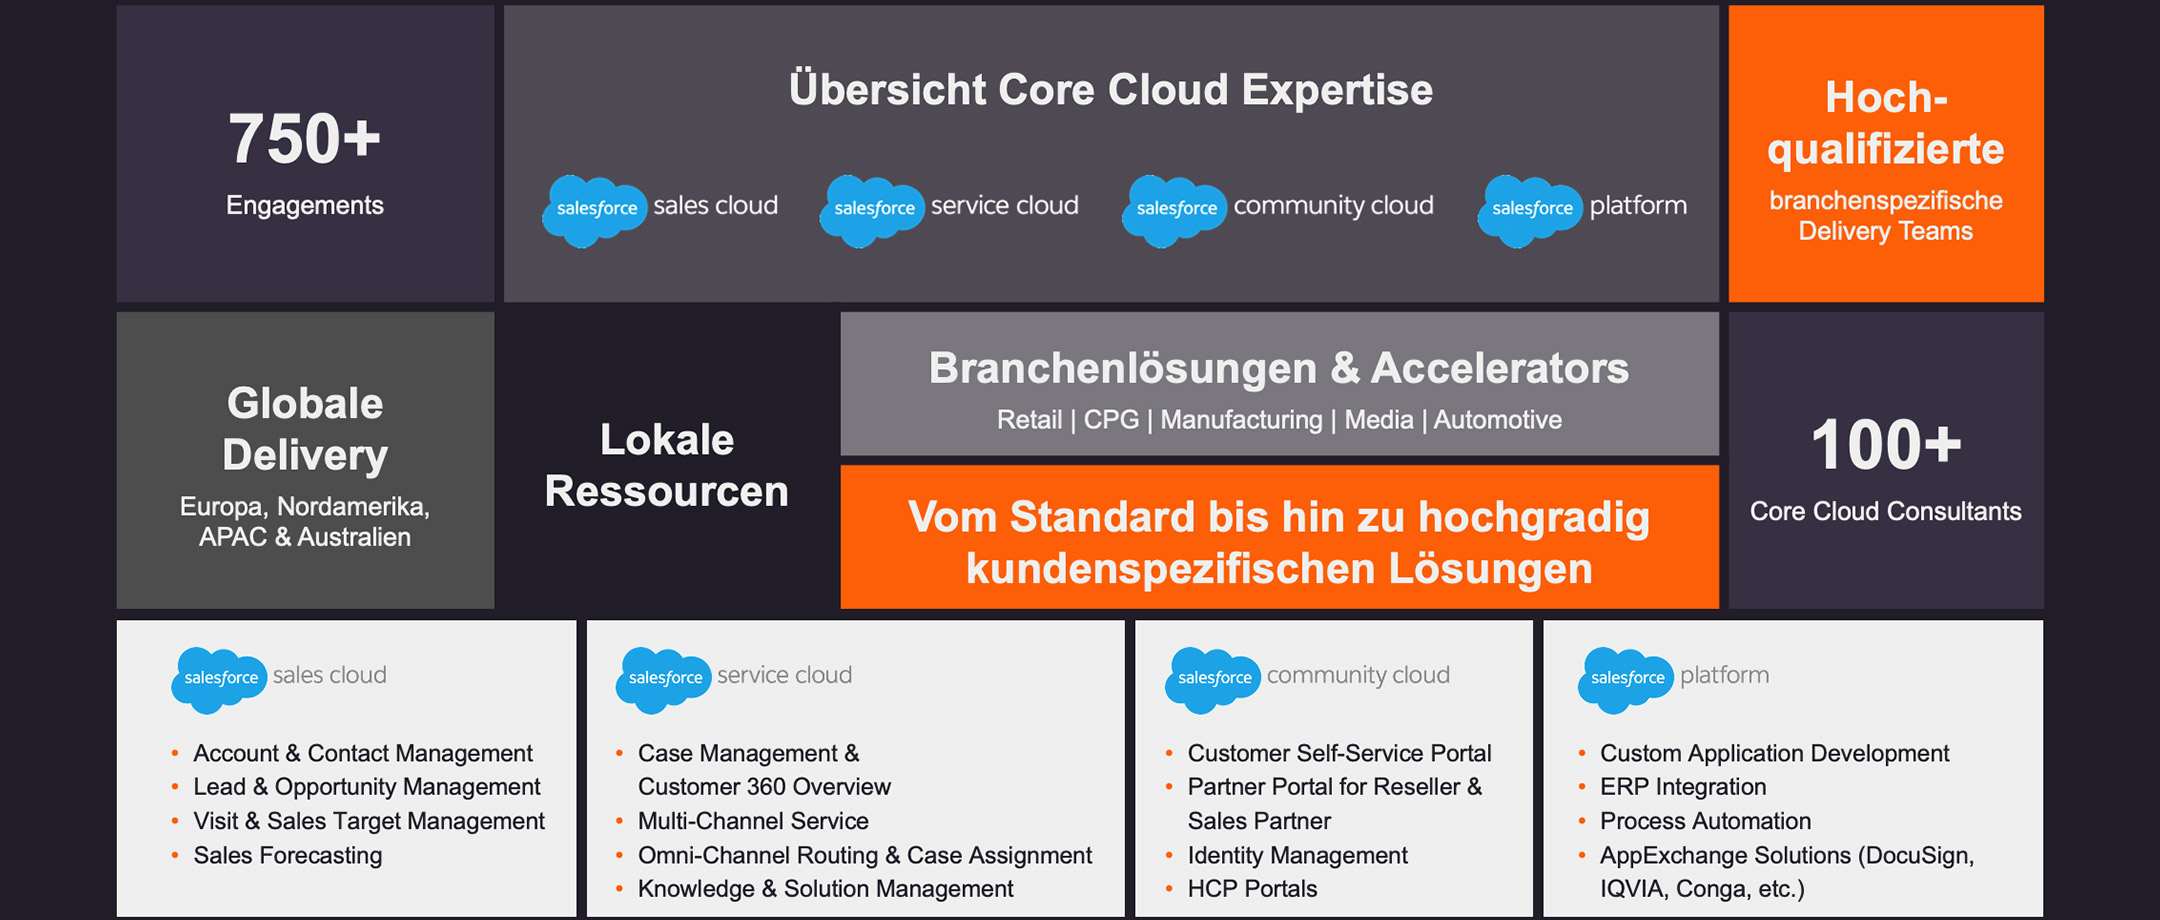 our core cloud expertise